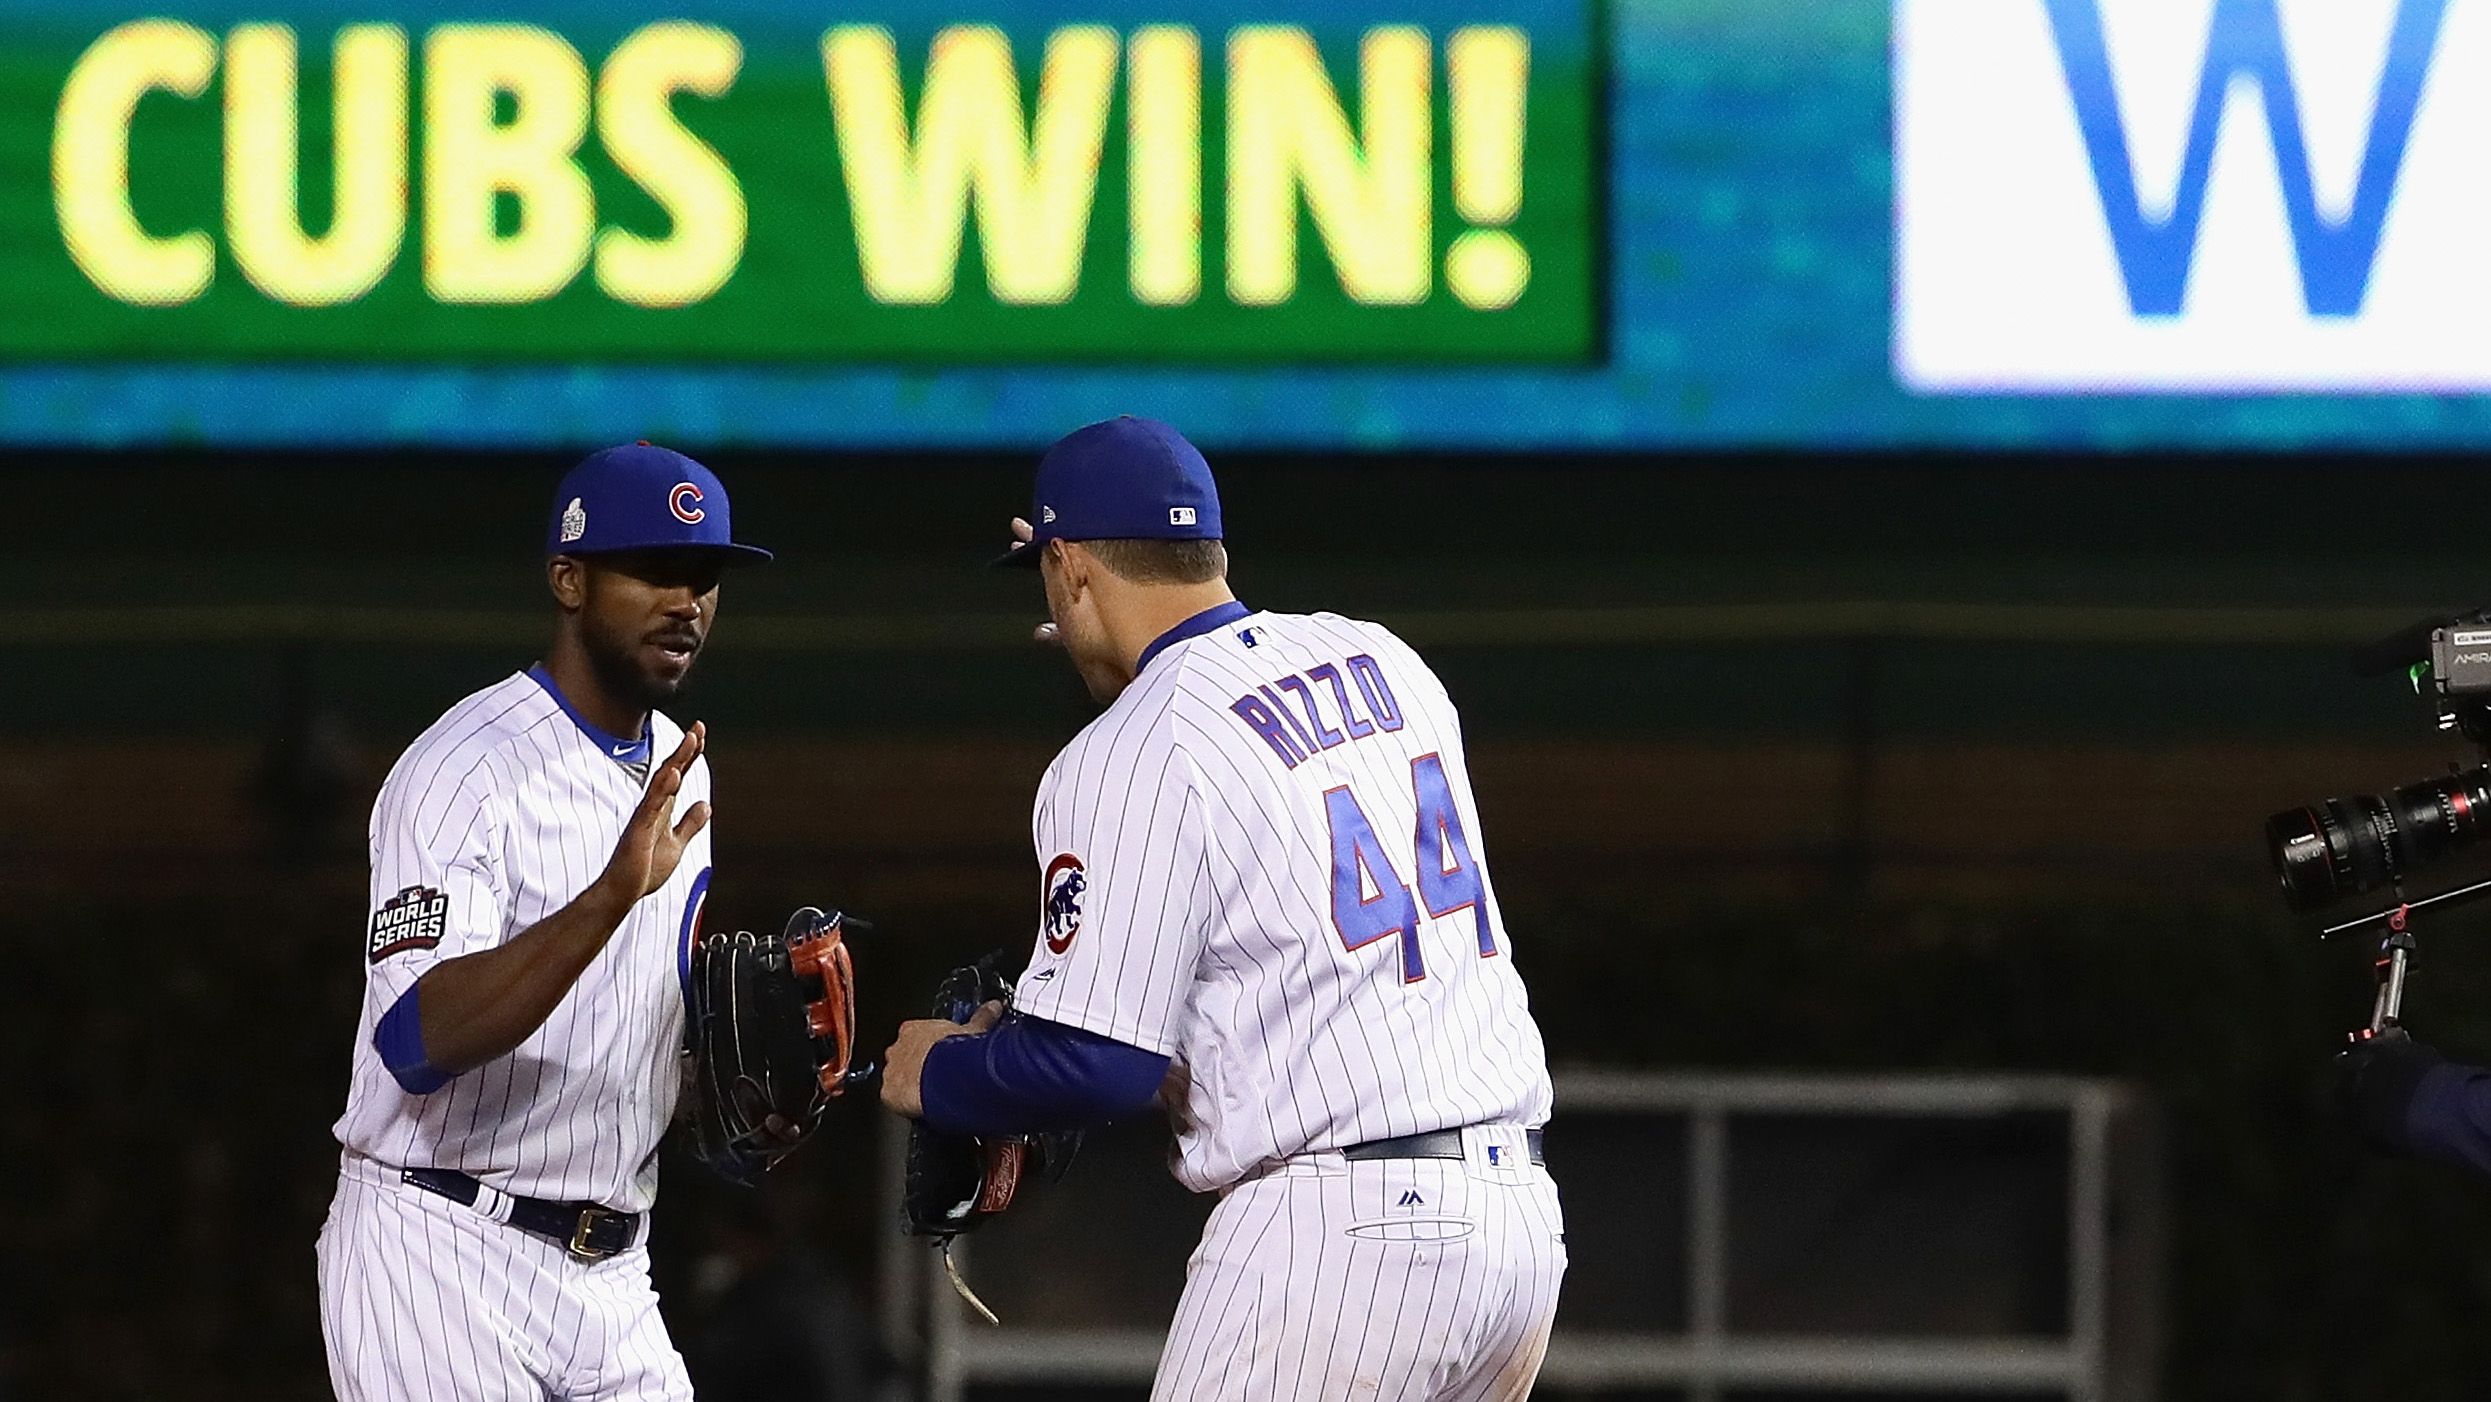 Chicago Cubs' Corey Patterson, right, watches his game-winning